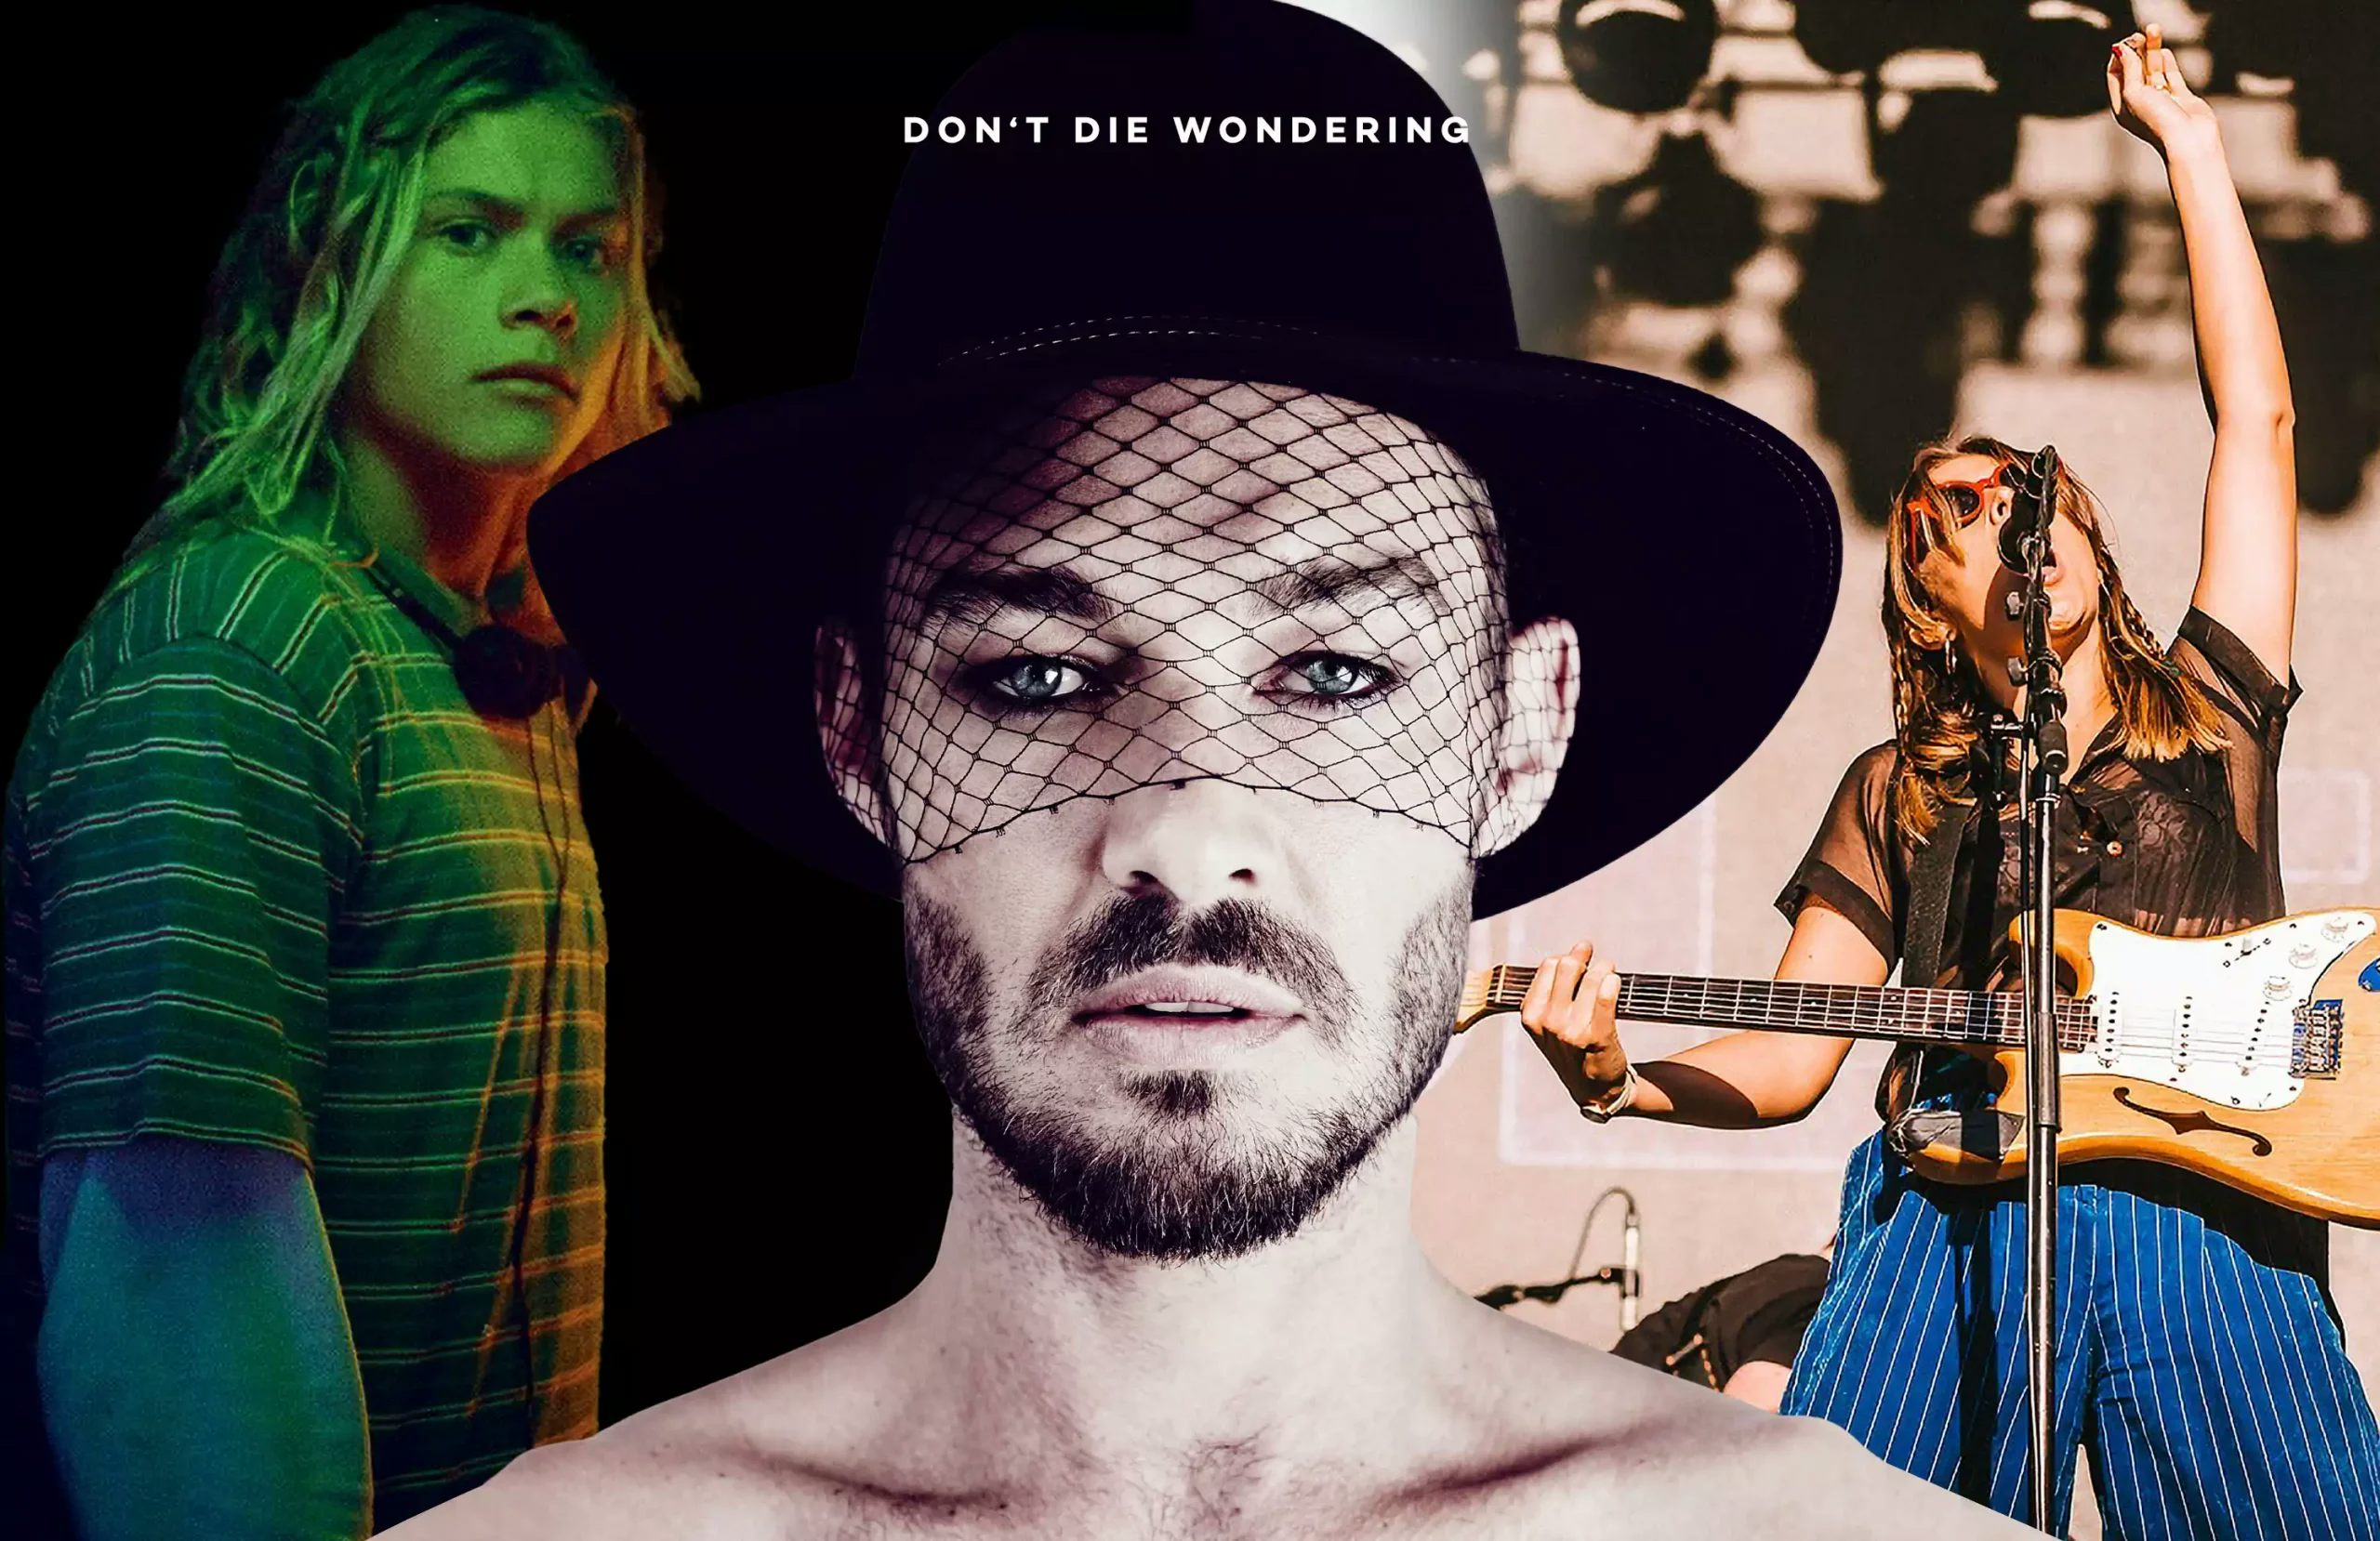 Rocker Daniel Johns to release ‘Sci-fi’ movie of his life